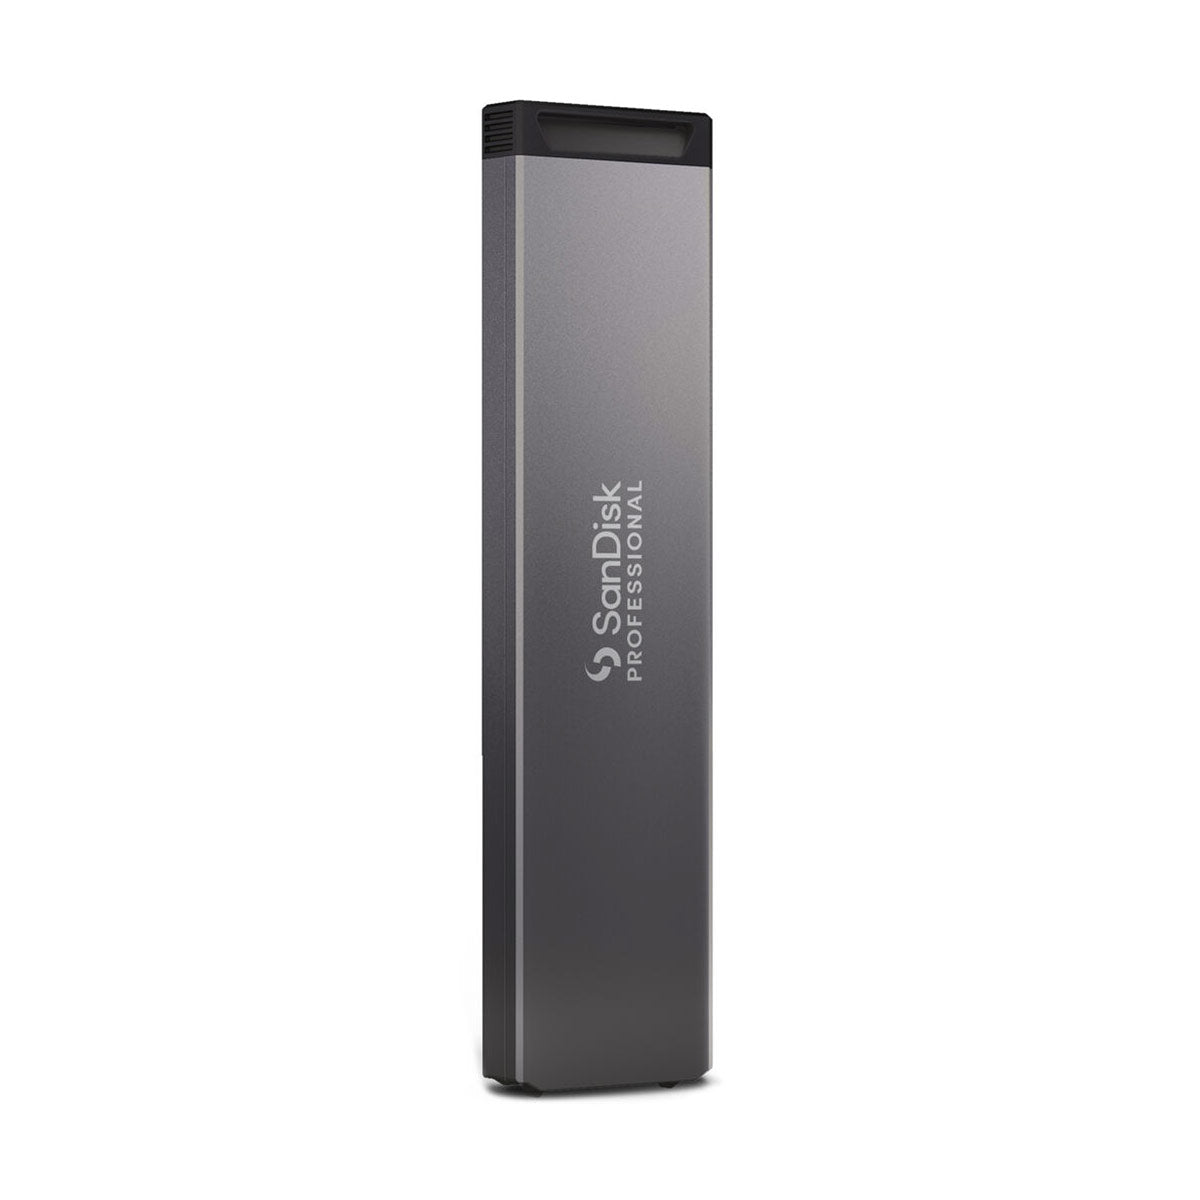 SanDisk Professional 2TB PRO-BLADE SSD and TRANSPORT